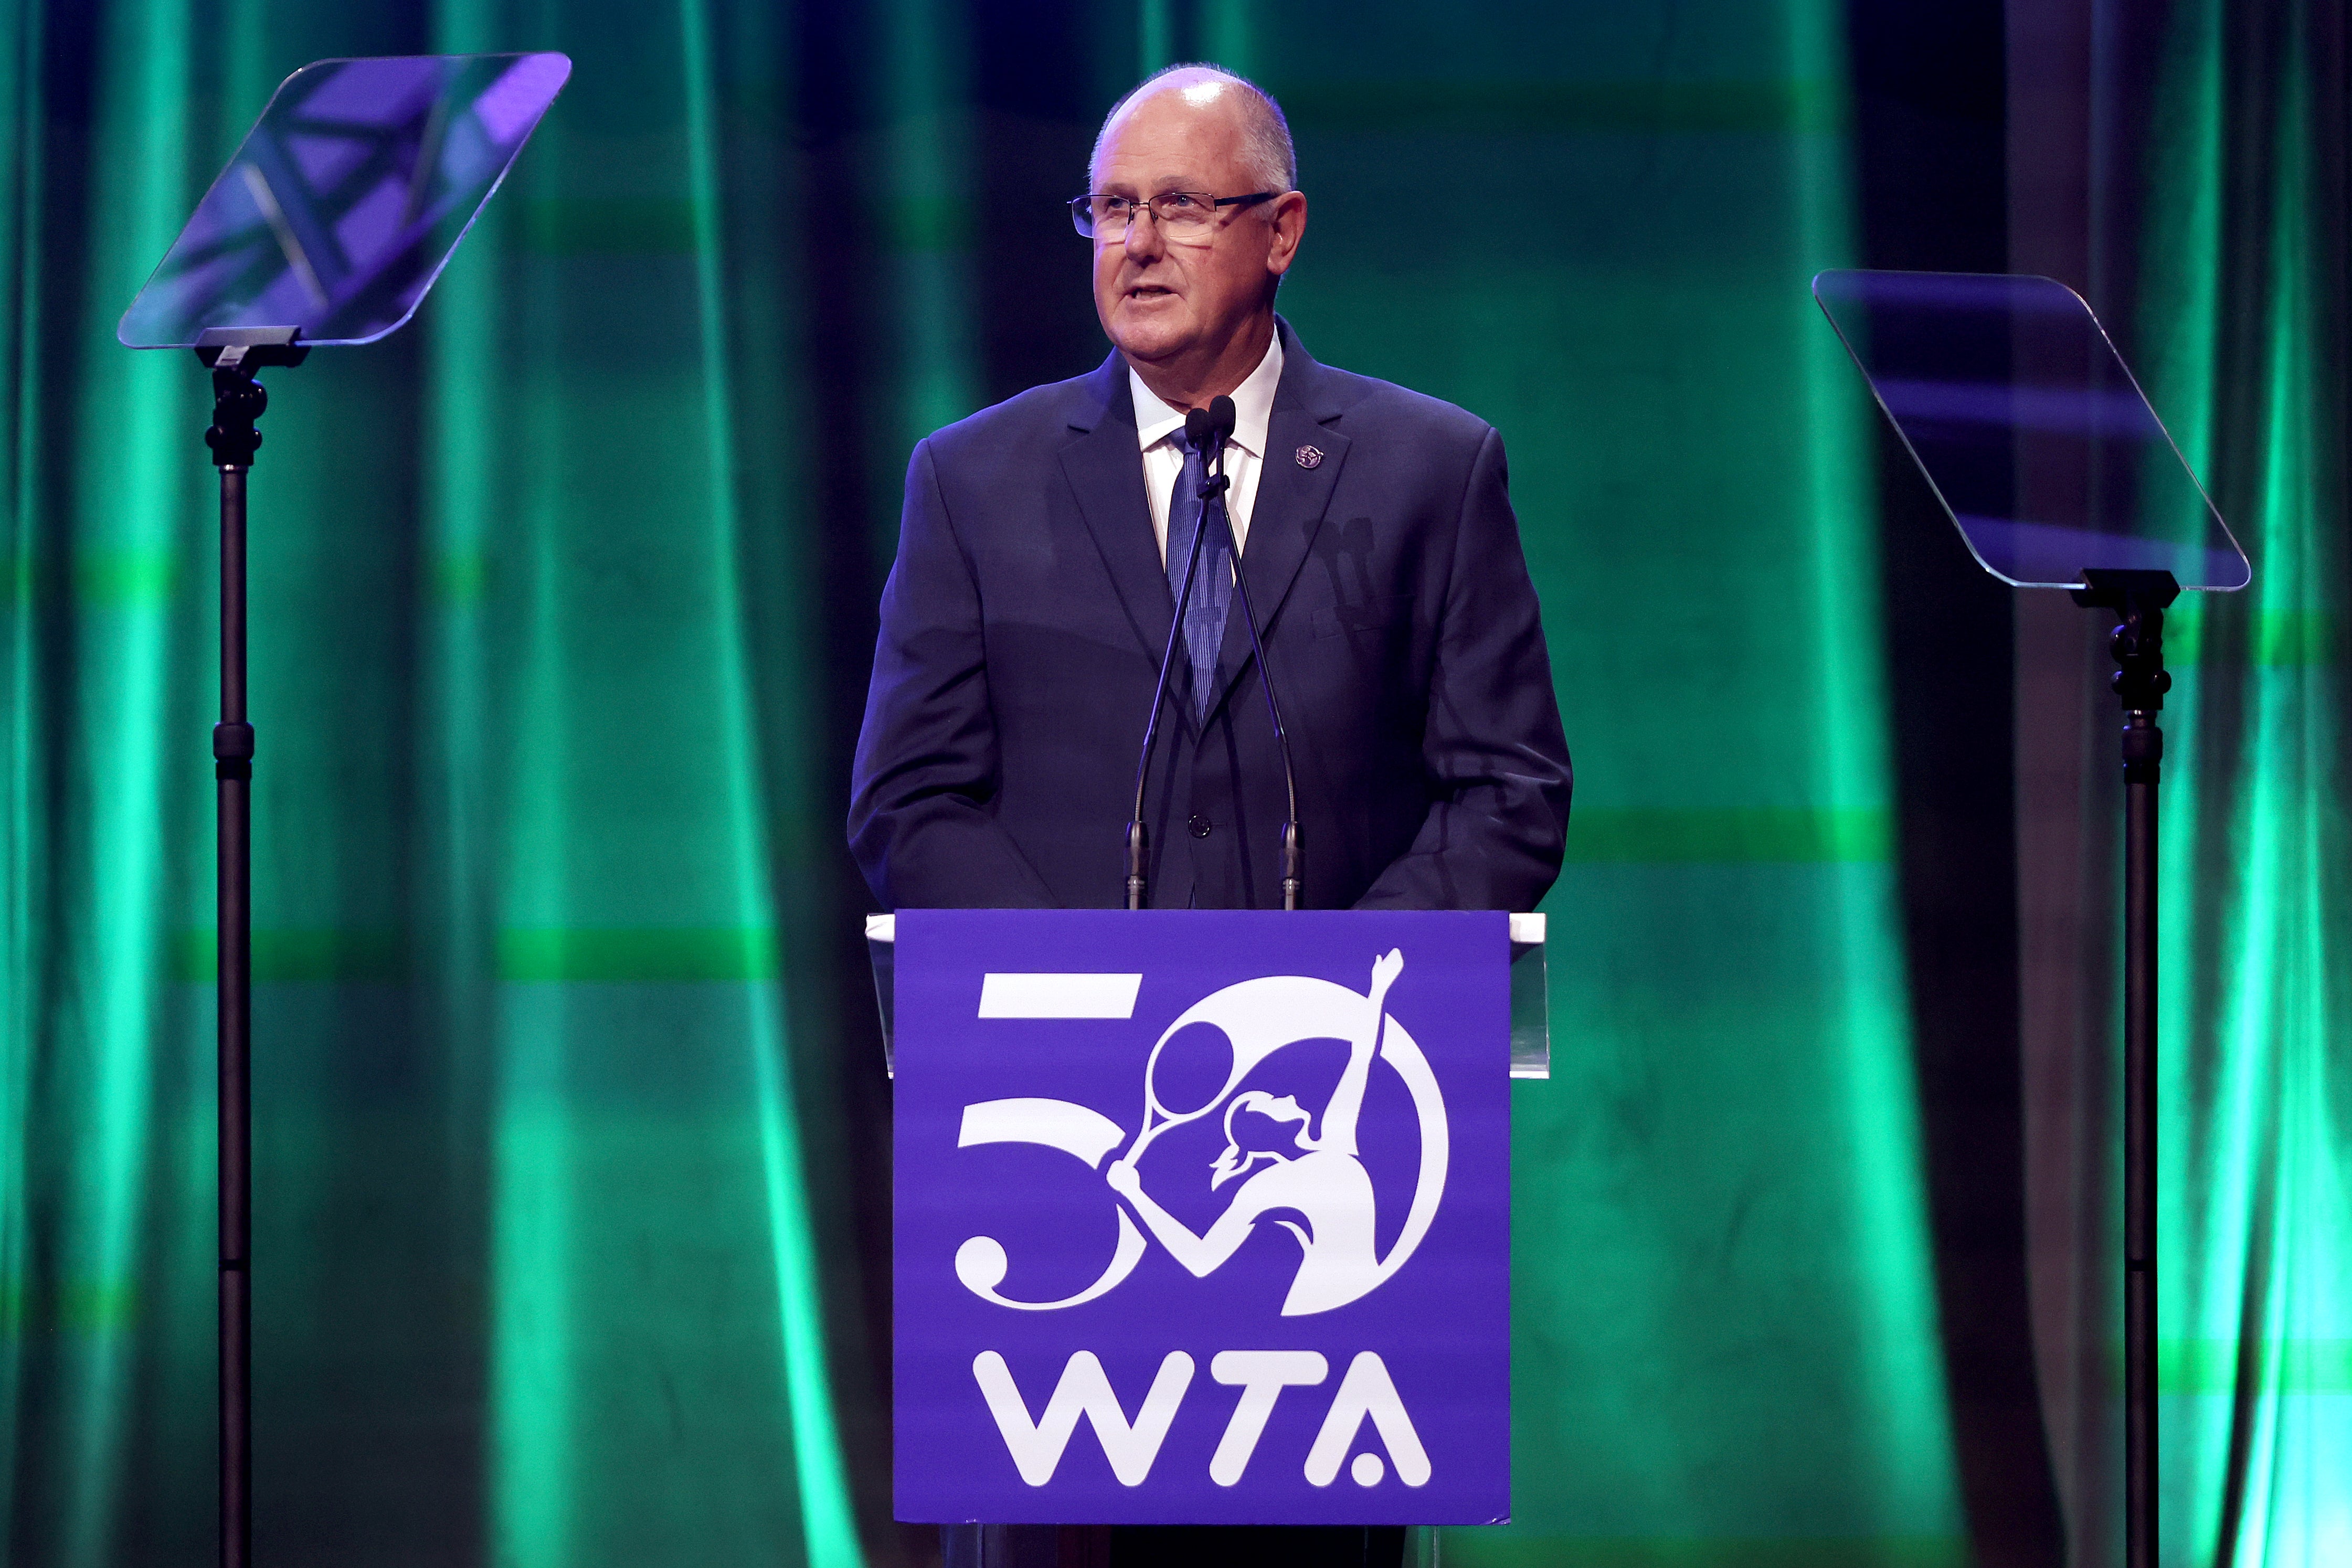 Steve Simon will stay with the WTA but is no longer CEO